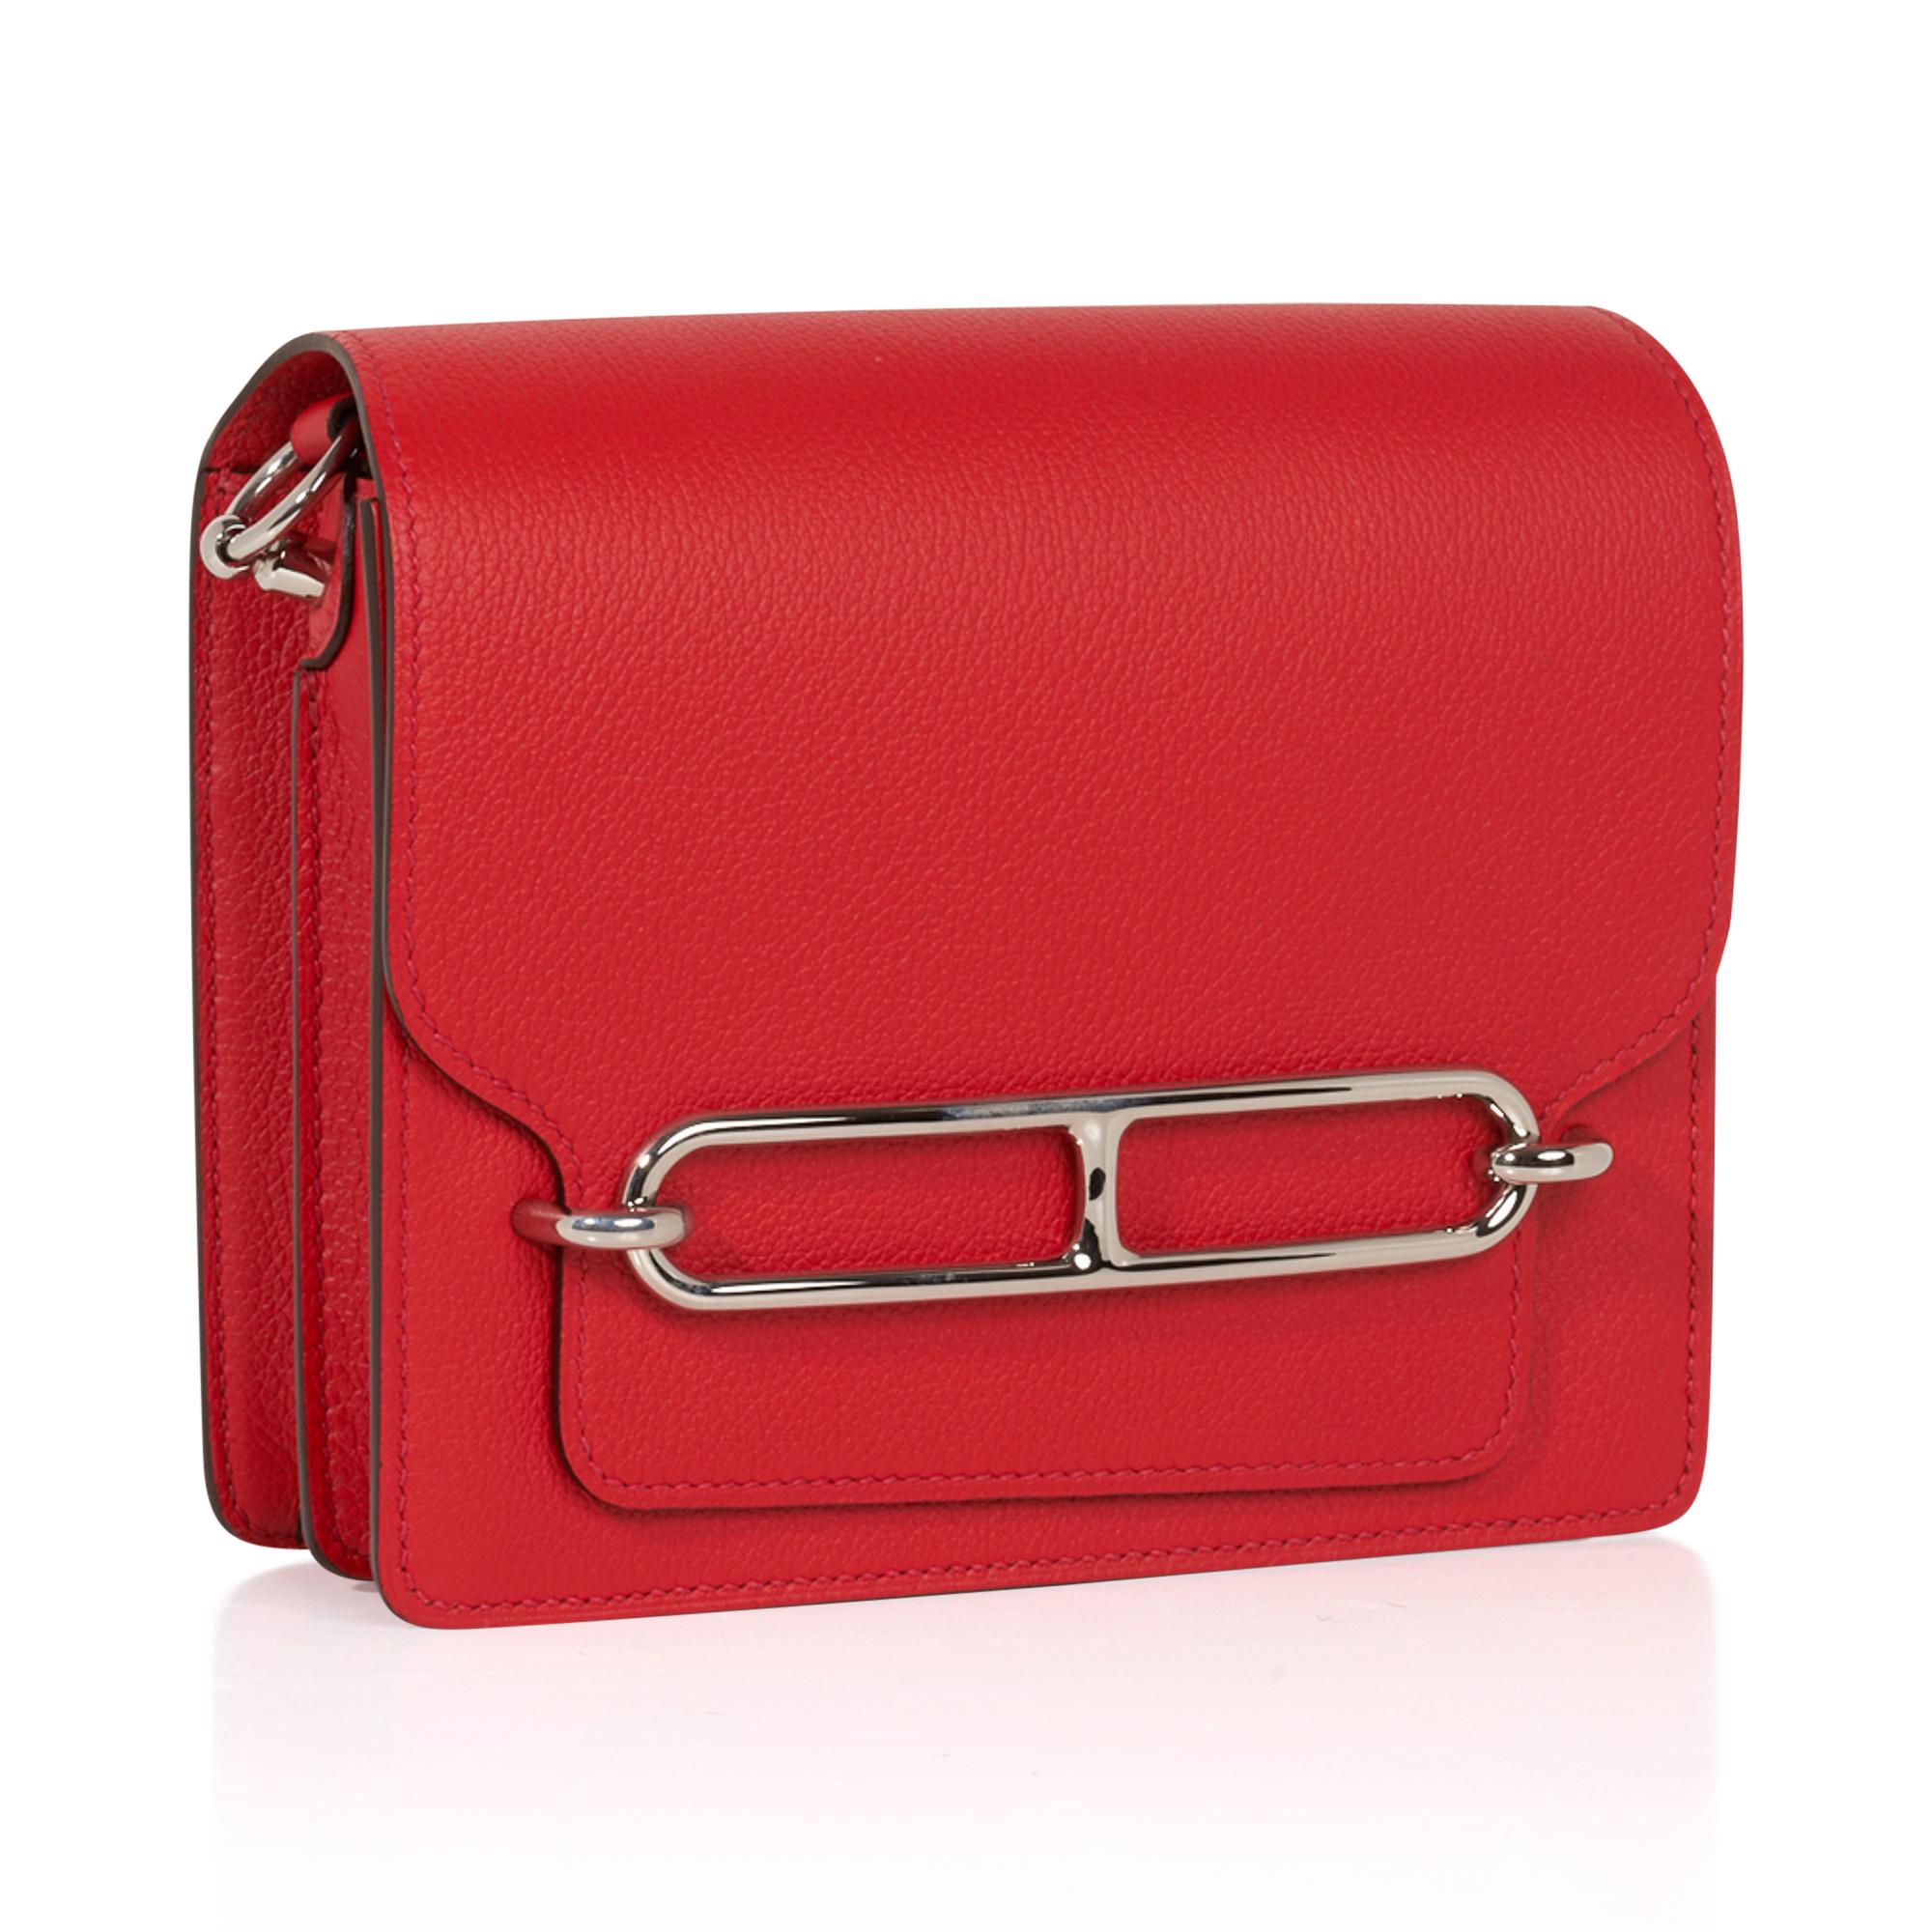 Guaranteed authentic Hermes mini Roulis bag featured in pink Rouge Casaque Lipstick Red.
Evercolor leather and fresh palladium hardware. 
This divine jewel and easily moves from day to night.
Convertible from a shoulder bag to a crossbody.
Has a